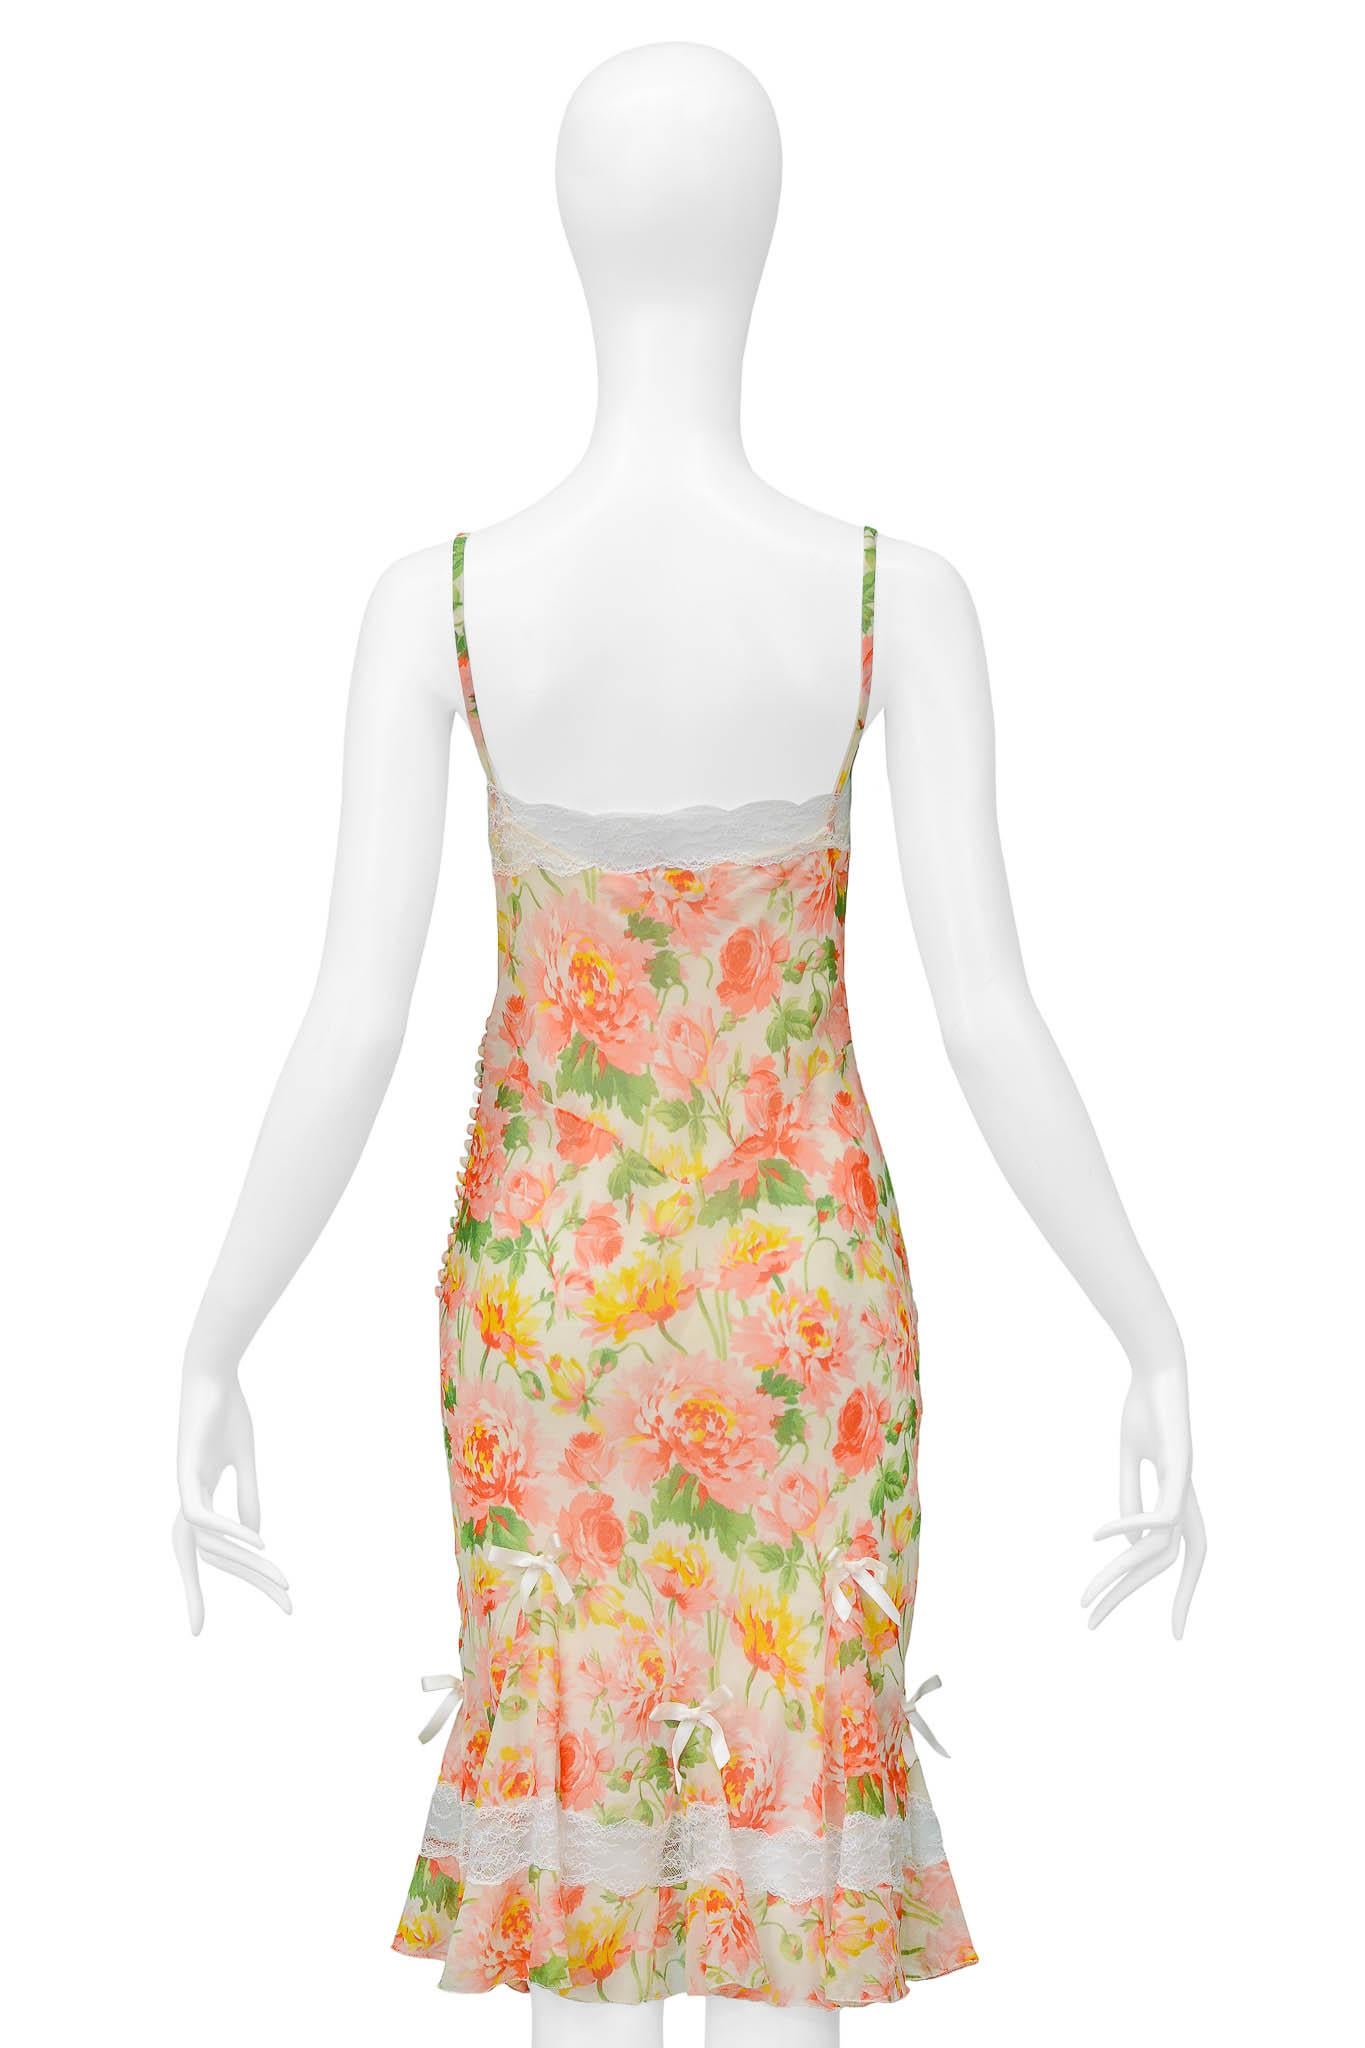 Women's Christian Dior By John Galliano Floral Dress With Lace Insets